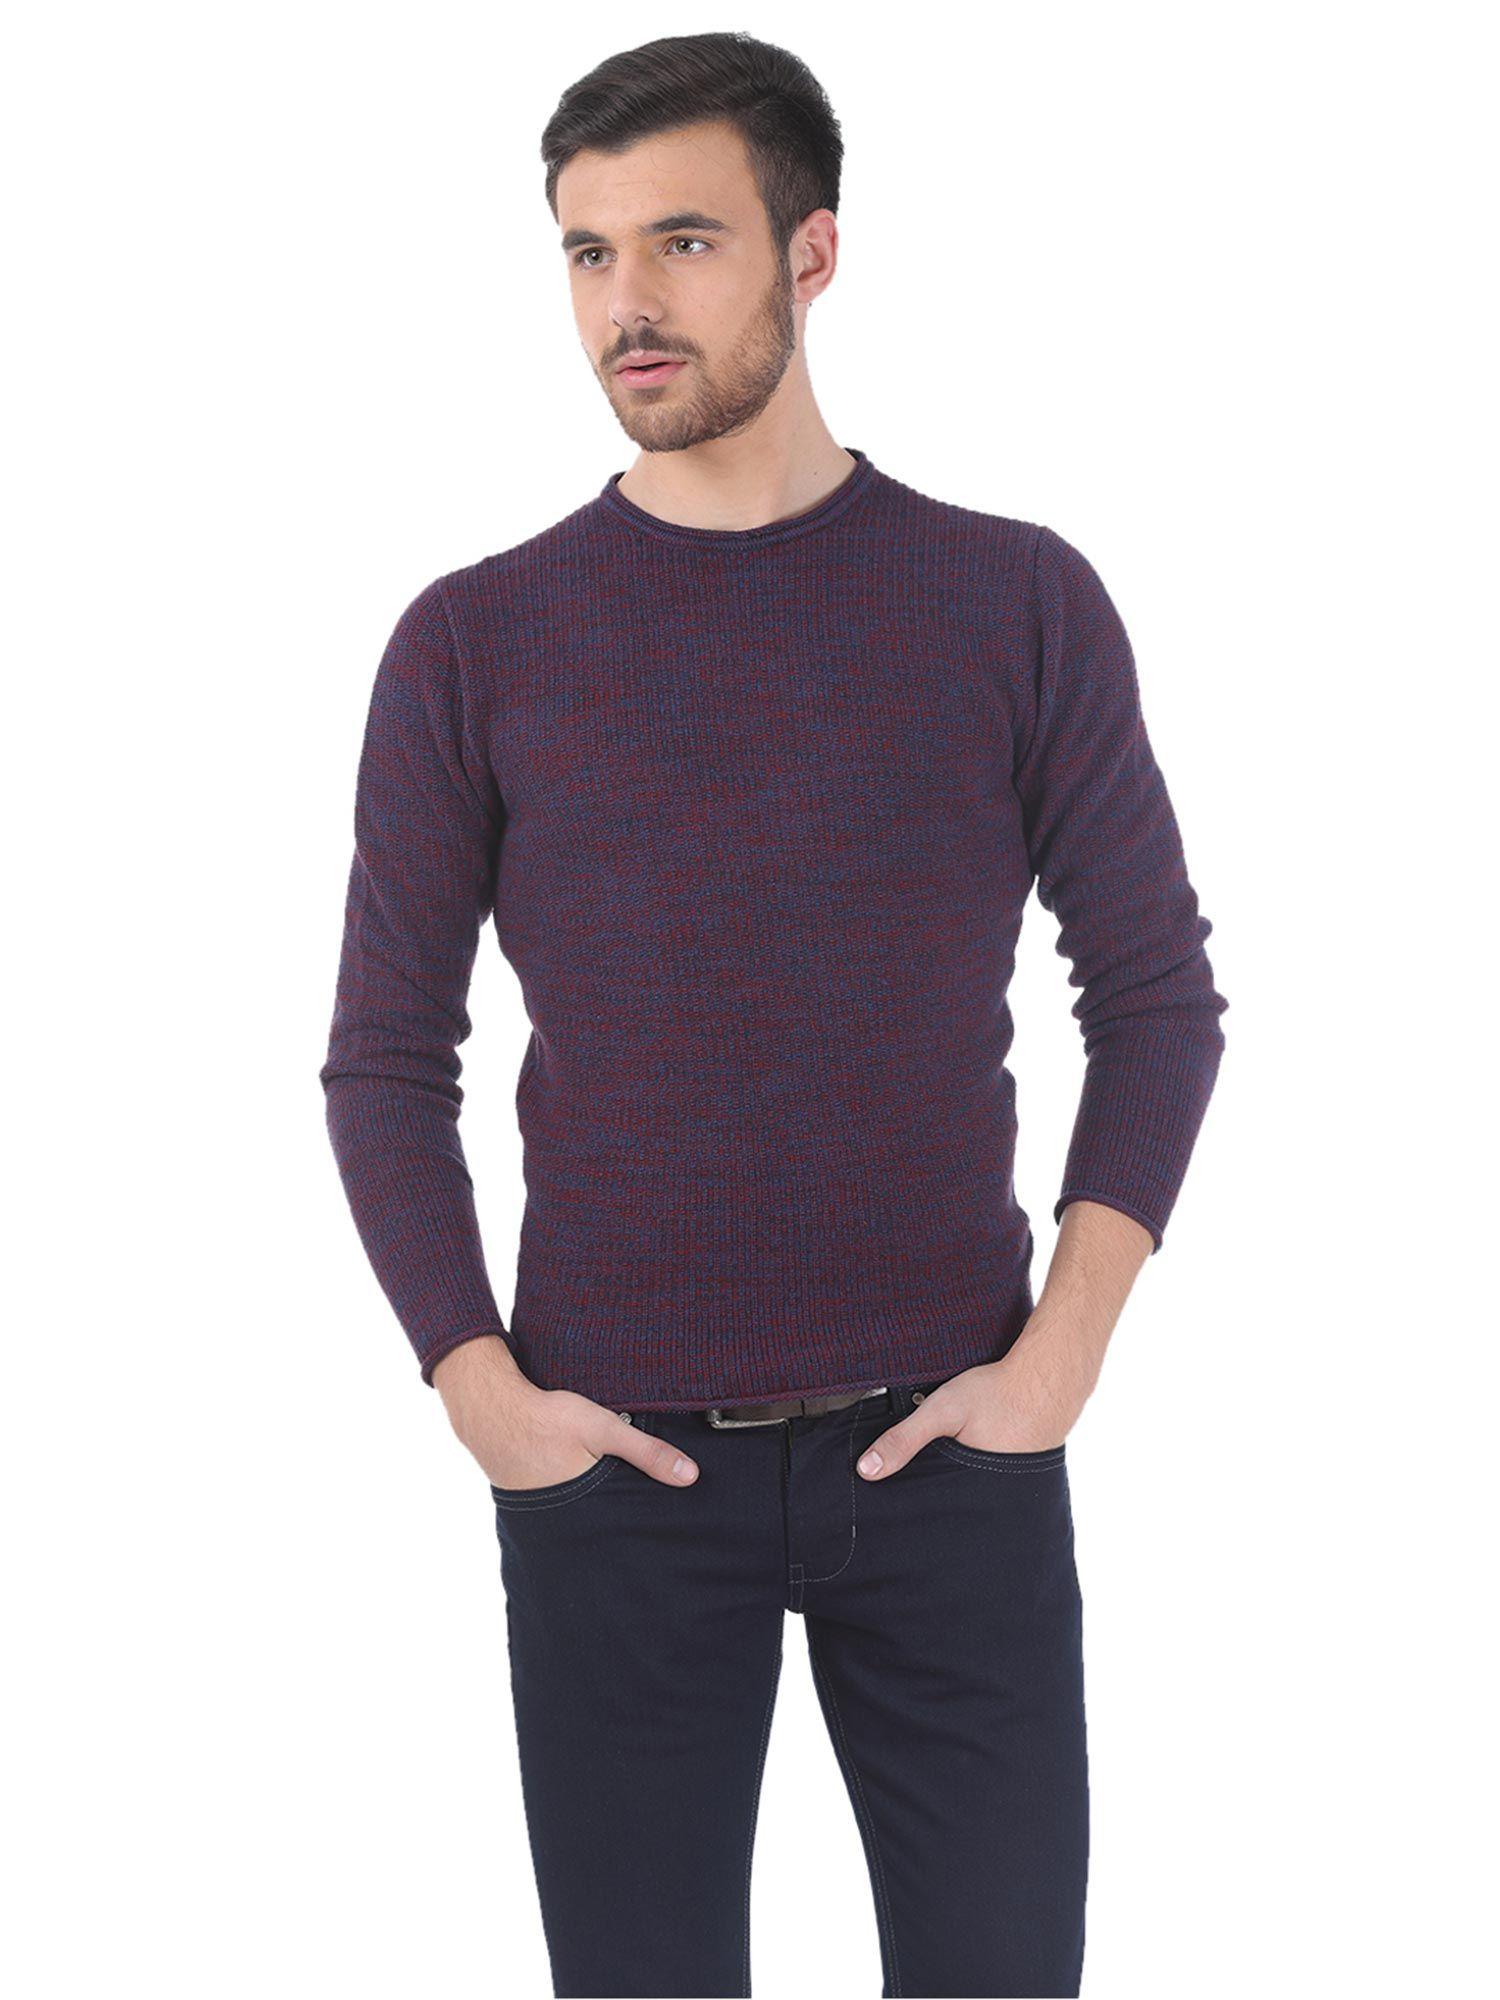 smart muscle fit northern light flat knit classic sweater